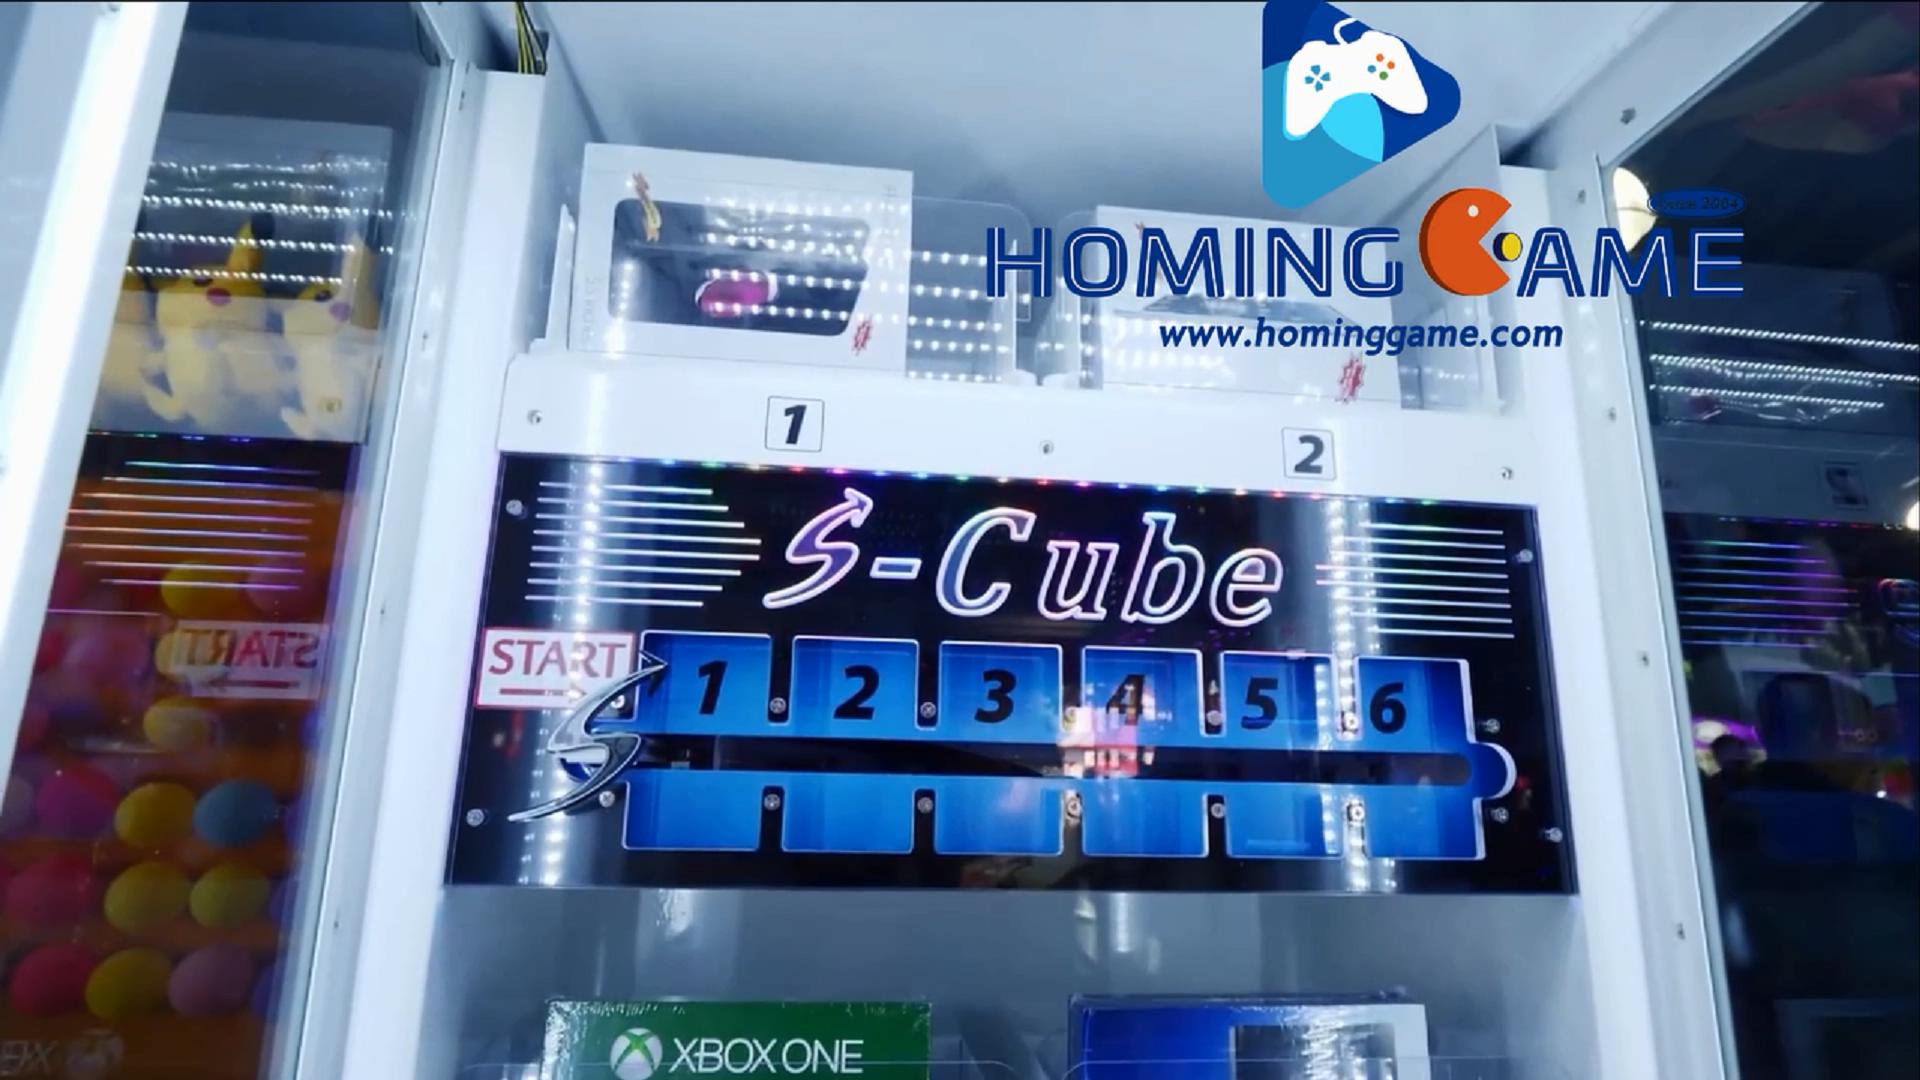 s-cube prize game machine,s cube,icube prize game machine,icube prize redemption game machine,s-cube redemption game machine,s-cube arcade game machine,game machine,arcade game machine,coin operated game machine,indoor game machine,amusement park game equipment,game equipment,slot game machine,electrical game machine,coin operated prize game machine,vending machine,prize vending machine,redemption machine,dispenser machine,coin games,key master game machine,winner cube prize,winner cub e prize game machine,hominggame,www.hominggame.com,gametube.hk,www.gametube.hk,hominggame prize game,hominggame s-cube prize game machine,scissor cut prize game machine,barber cut prize game machine,key point push prize game machine,key push prize game,push prize game machine,push a win prize game machine,stacker prize game machine,shopping mall prize game machine,axe master prize game machine,magic arrow prize game machine,arrow prize game machine,crane machine,claw game machine,claw prize game machine,crane claw machine,vending,diy vending machine,prize machine